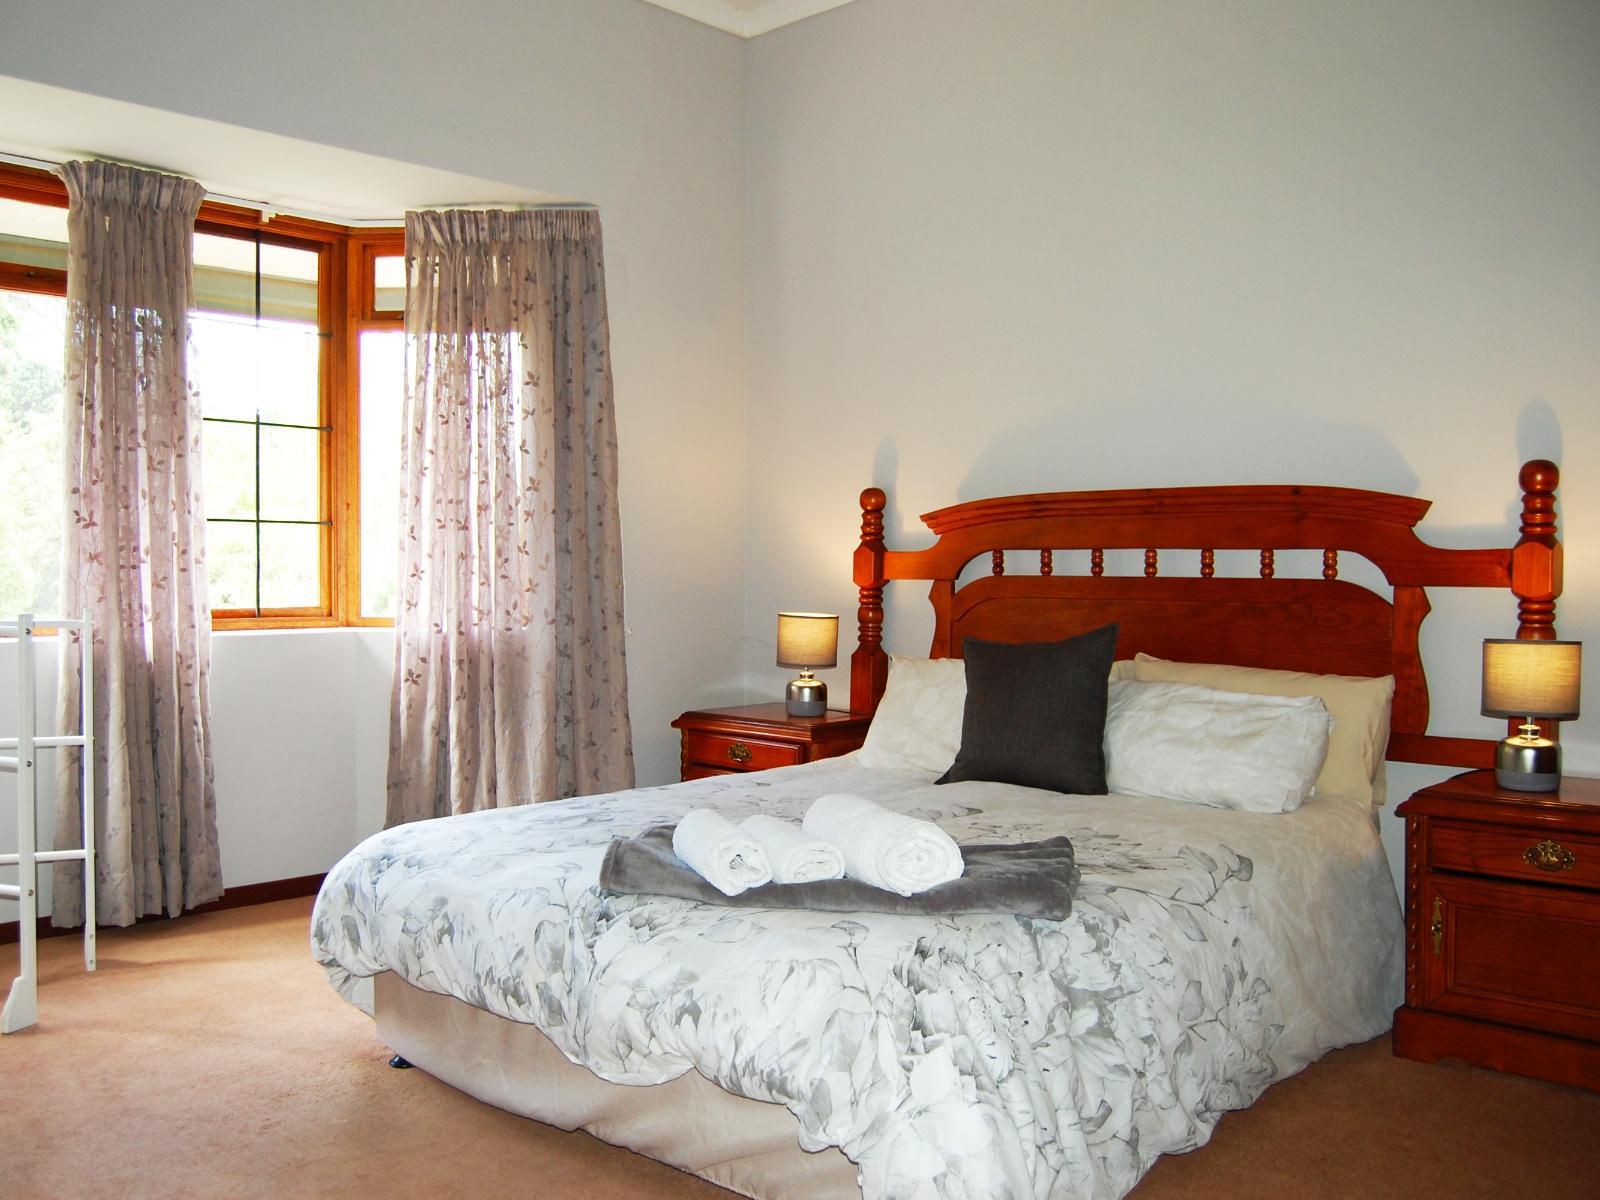 Stonehaven Clarens Clarens Free State South Africa Bedroom